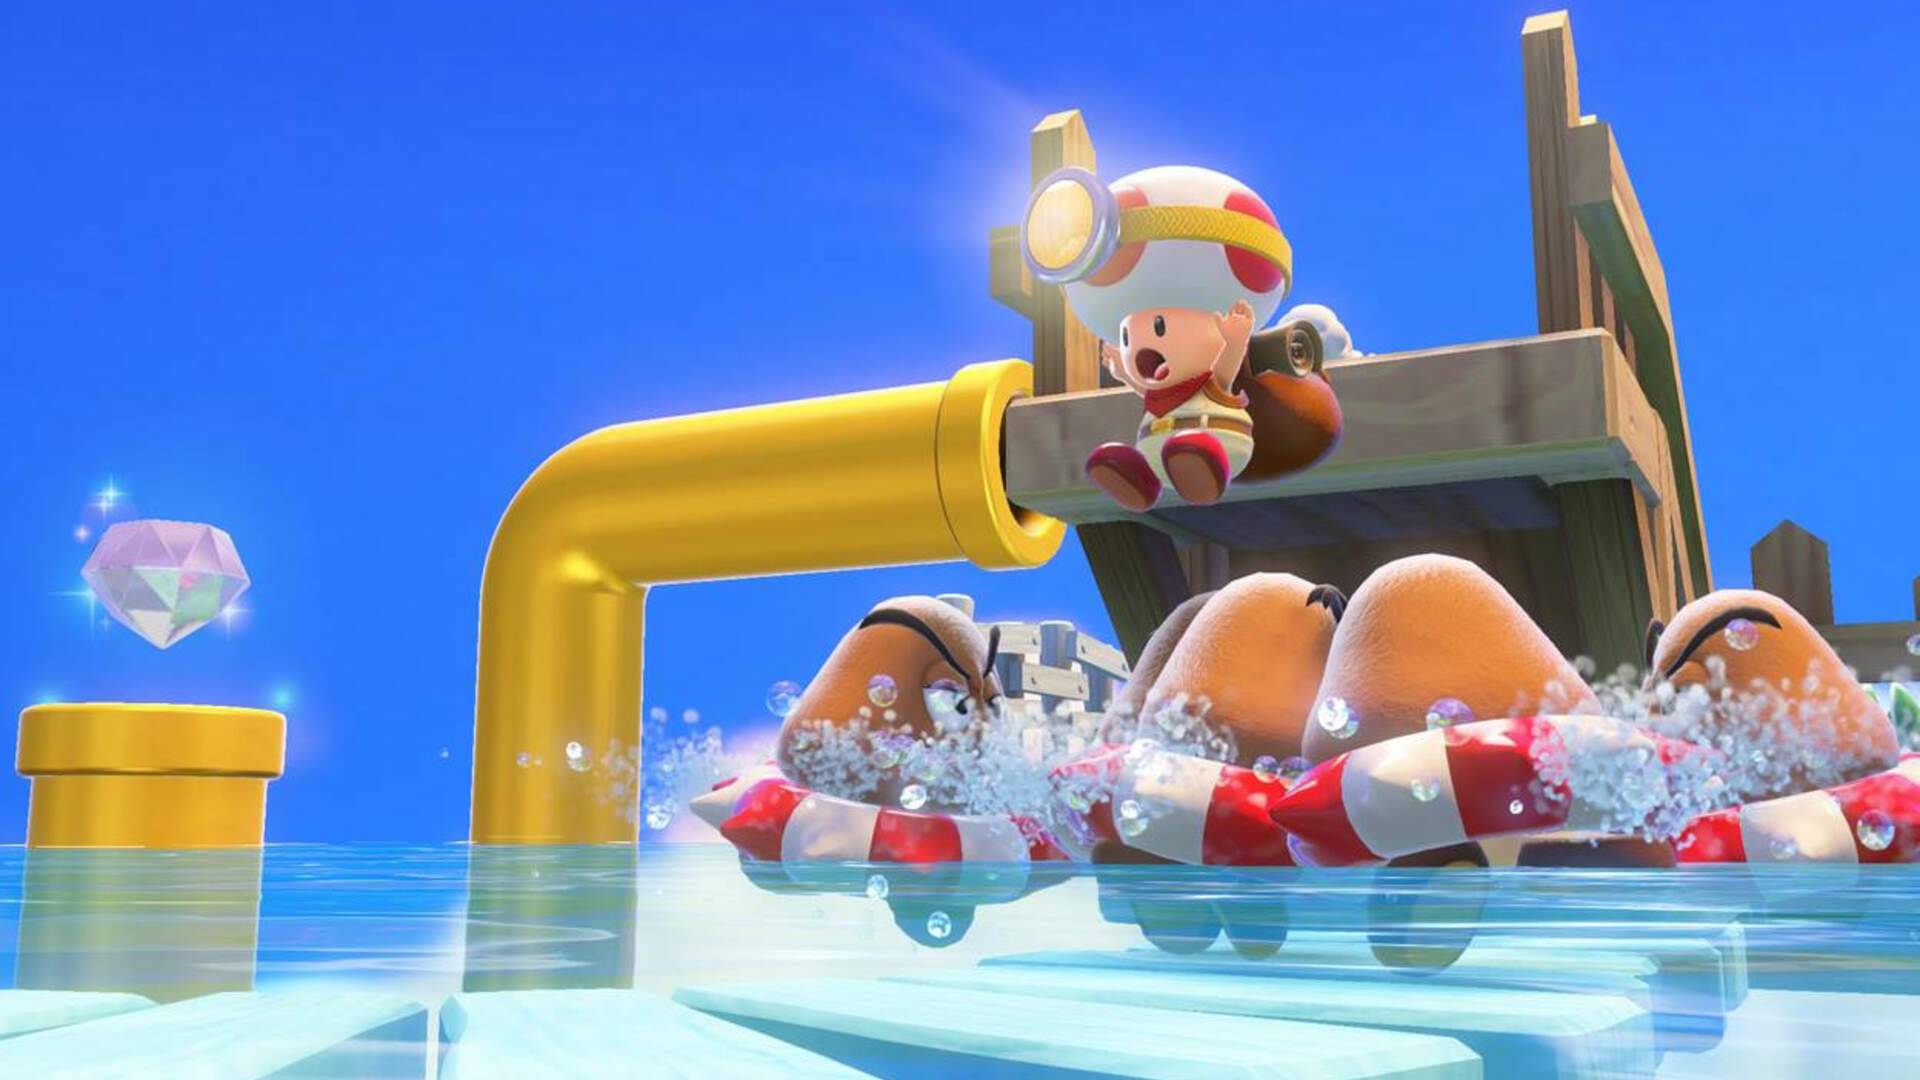 Captain Toad Treasure Tracker Is Free To Try With The Latest Nso Game Trial 8484